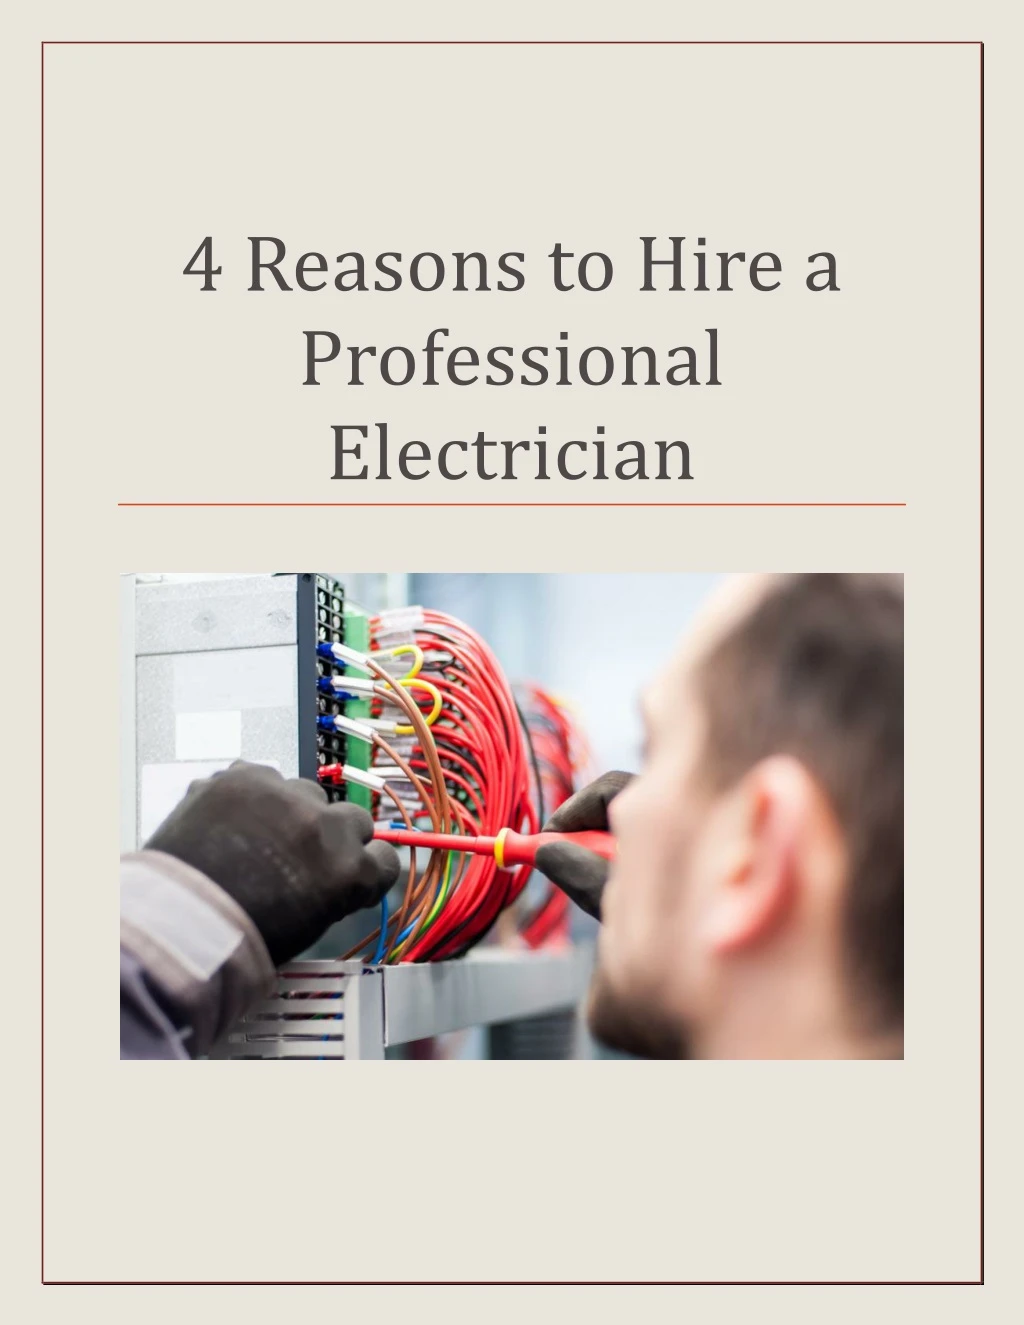 4 reasons to hire a professional electrician